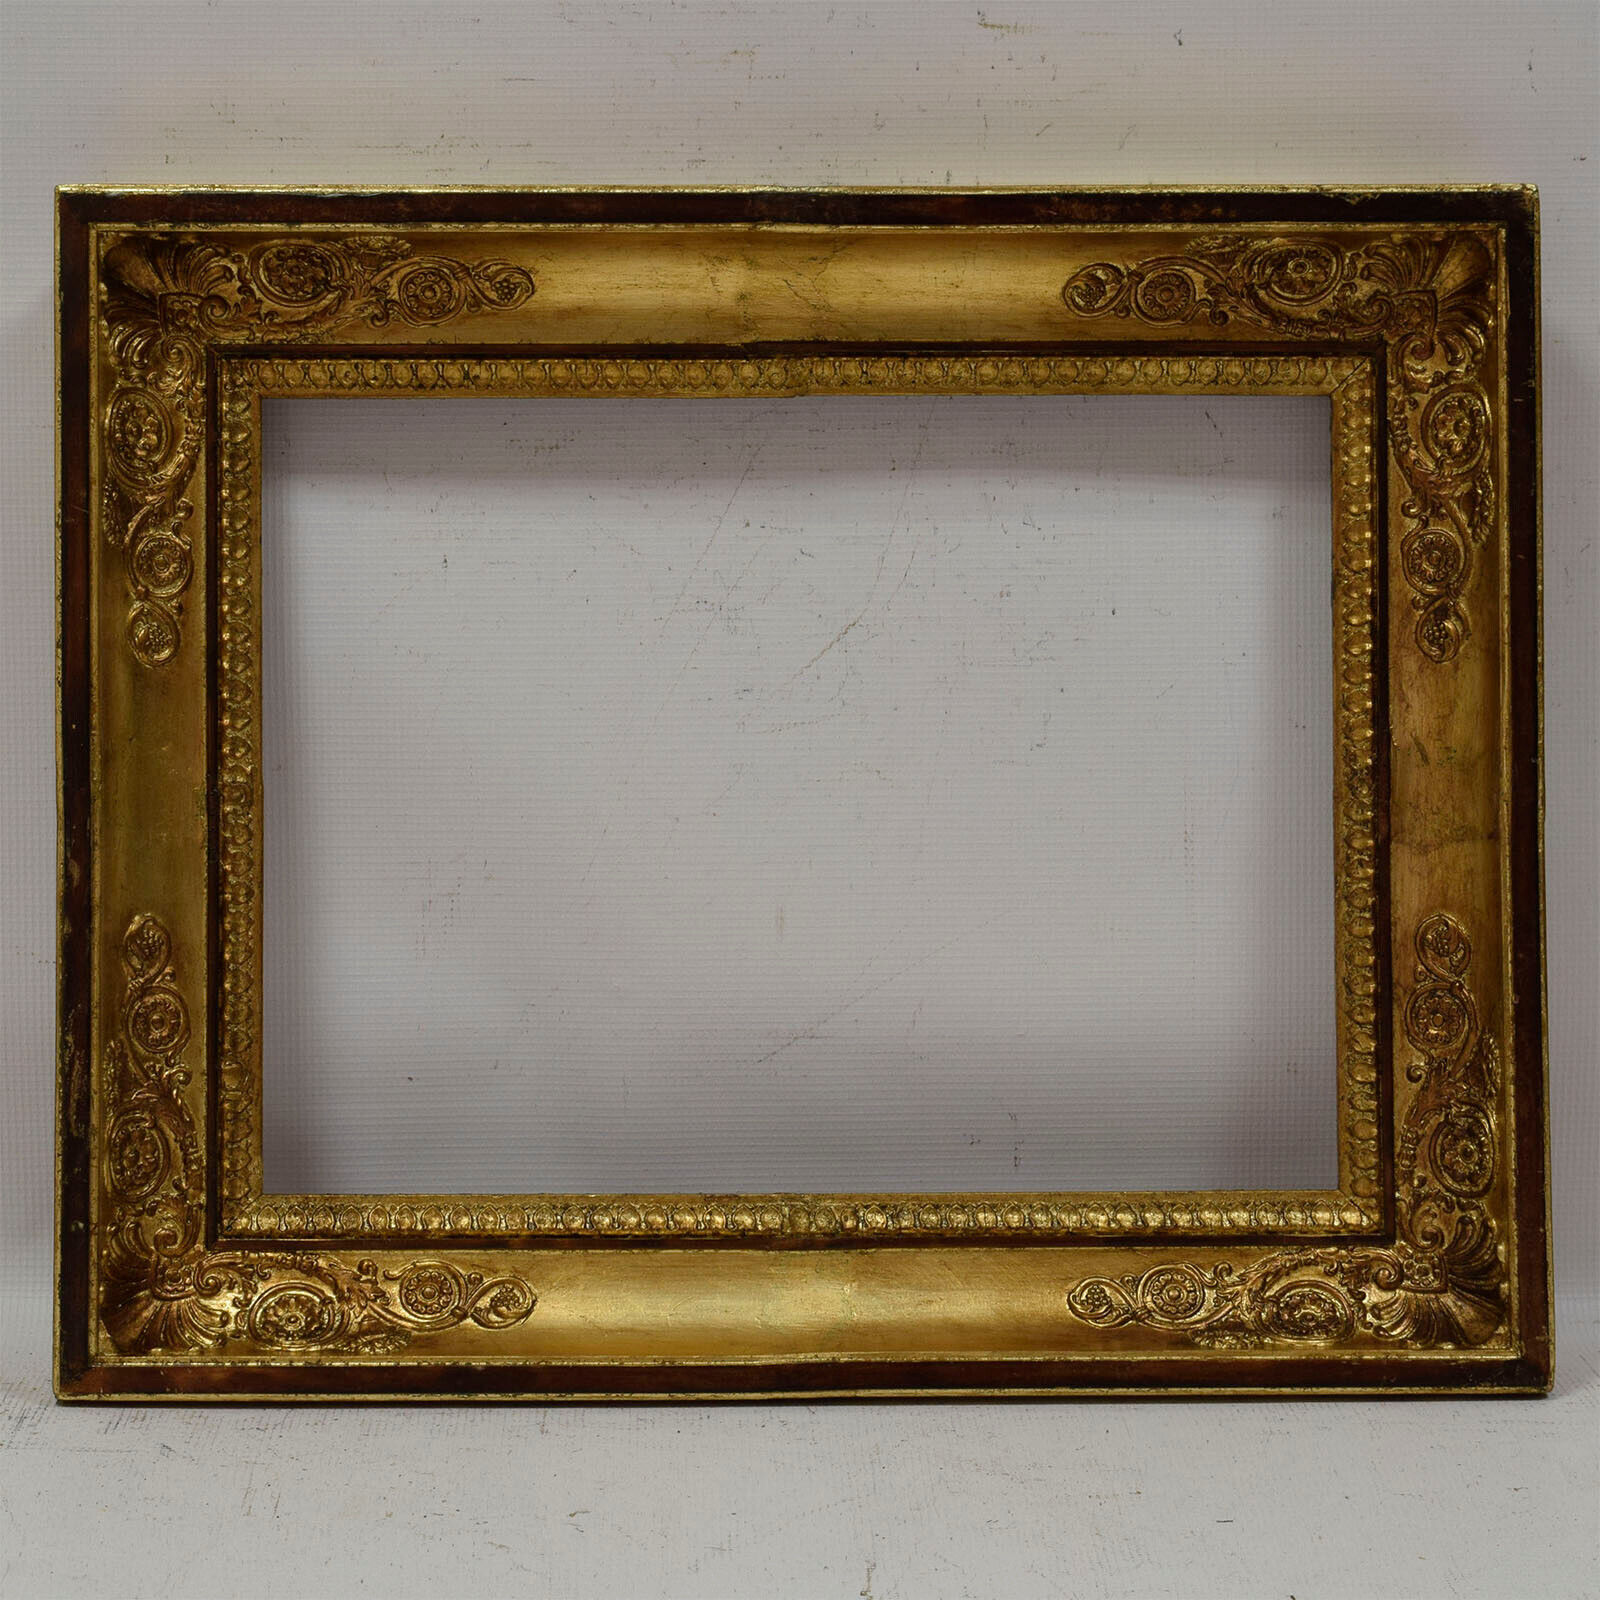 Ca. 1880-1900 Old wooden frame with metal leaf Internal: 16.3x12.4 in